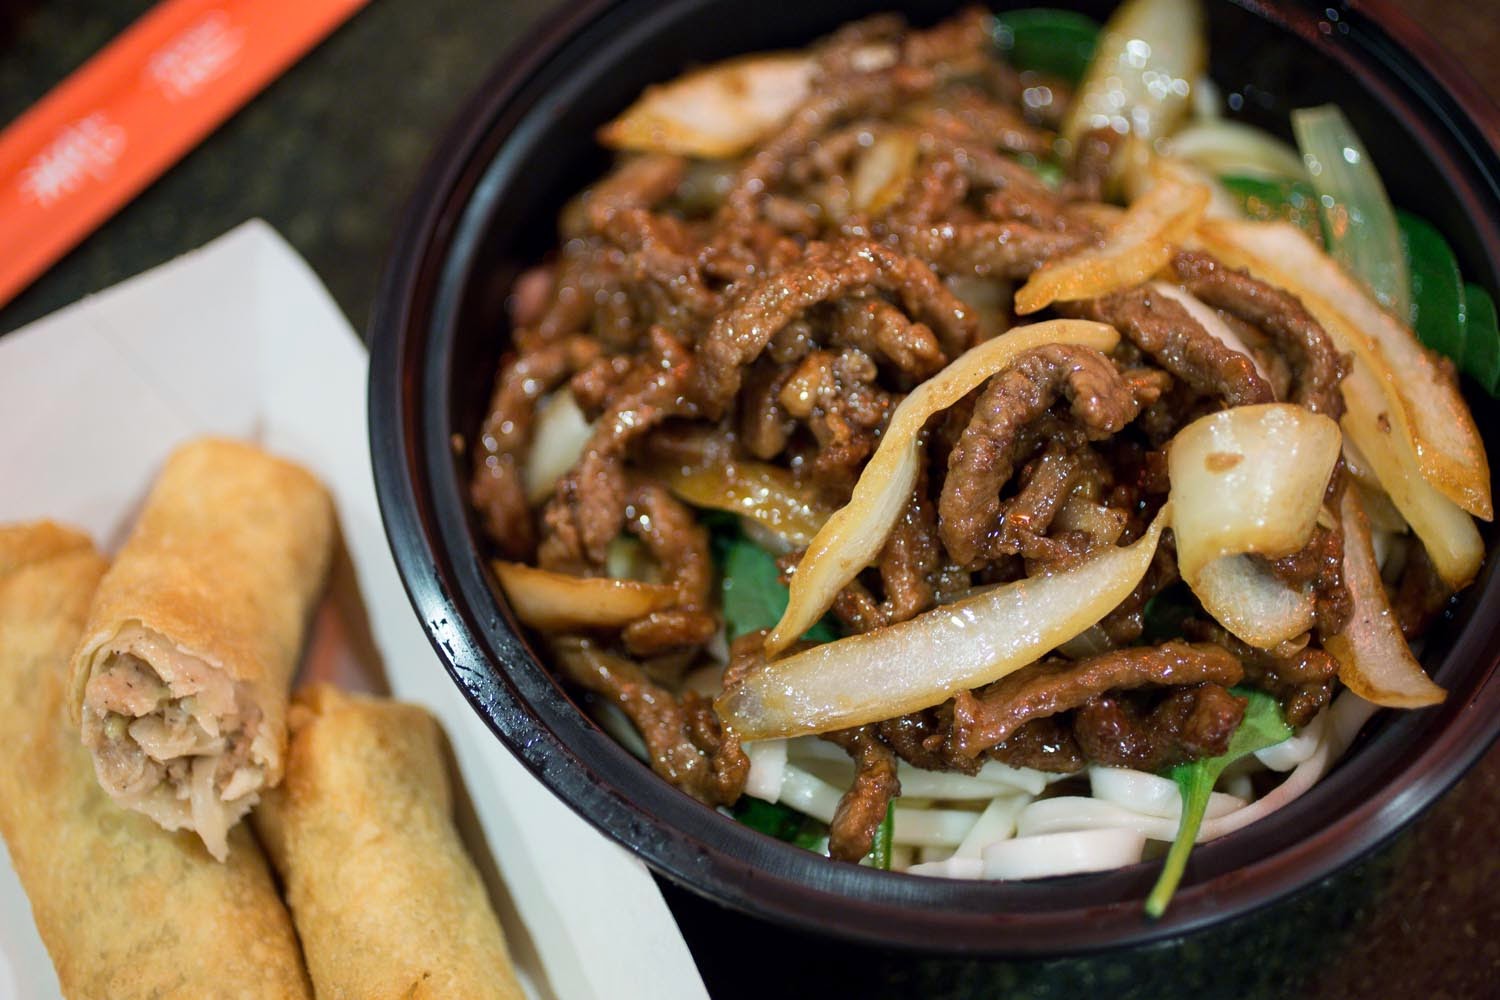 Epcot: Lotus Blossom Cafe- Beef Noodles and Eggrolls